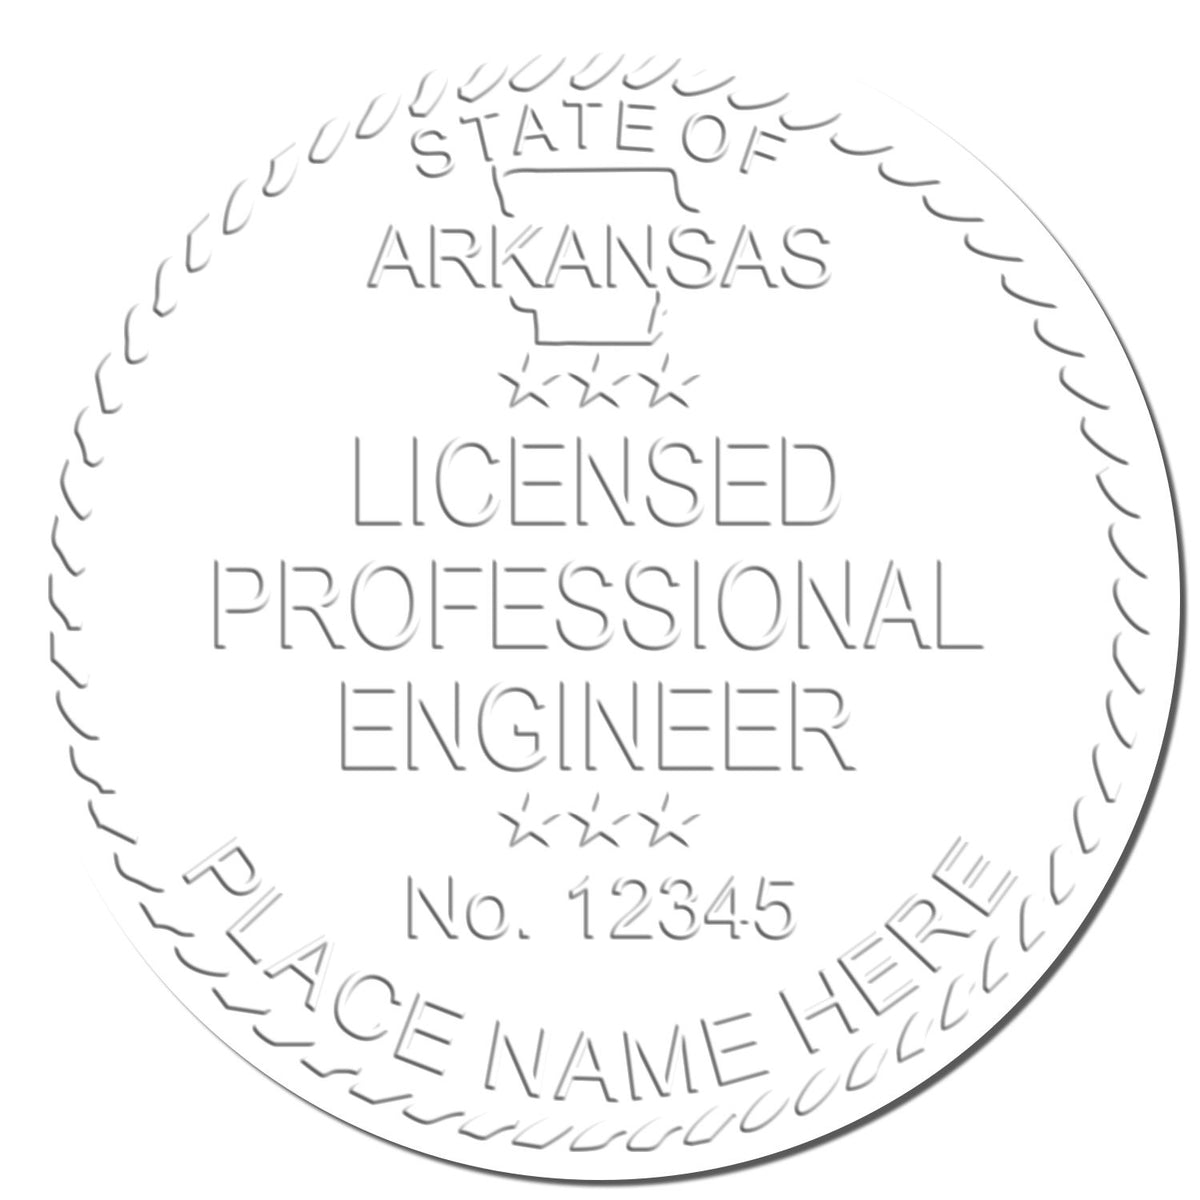 This paper is stamped with a sample imprint of the Heavy Duty Cast Iron Arkansas Engineer Seal Embosser, signifying its quality and reliability.